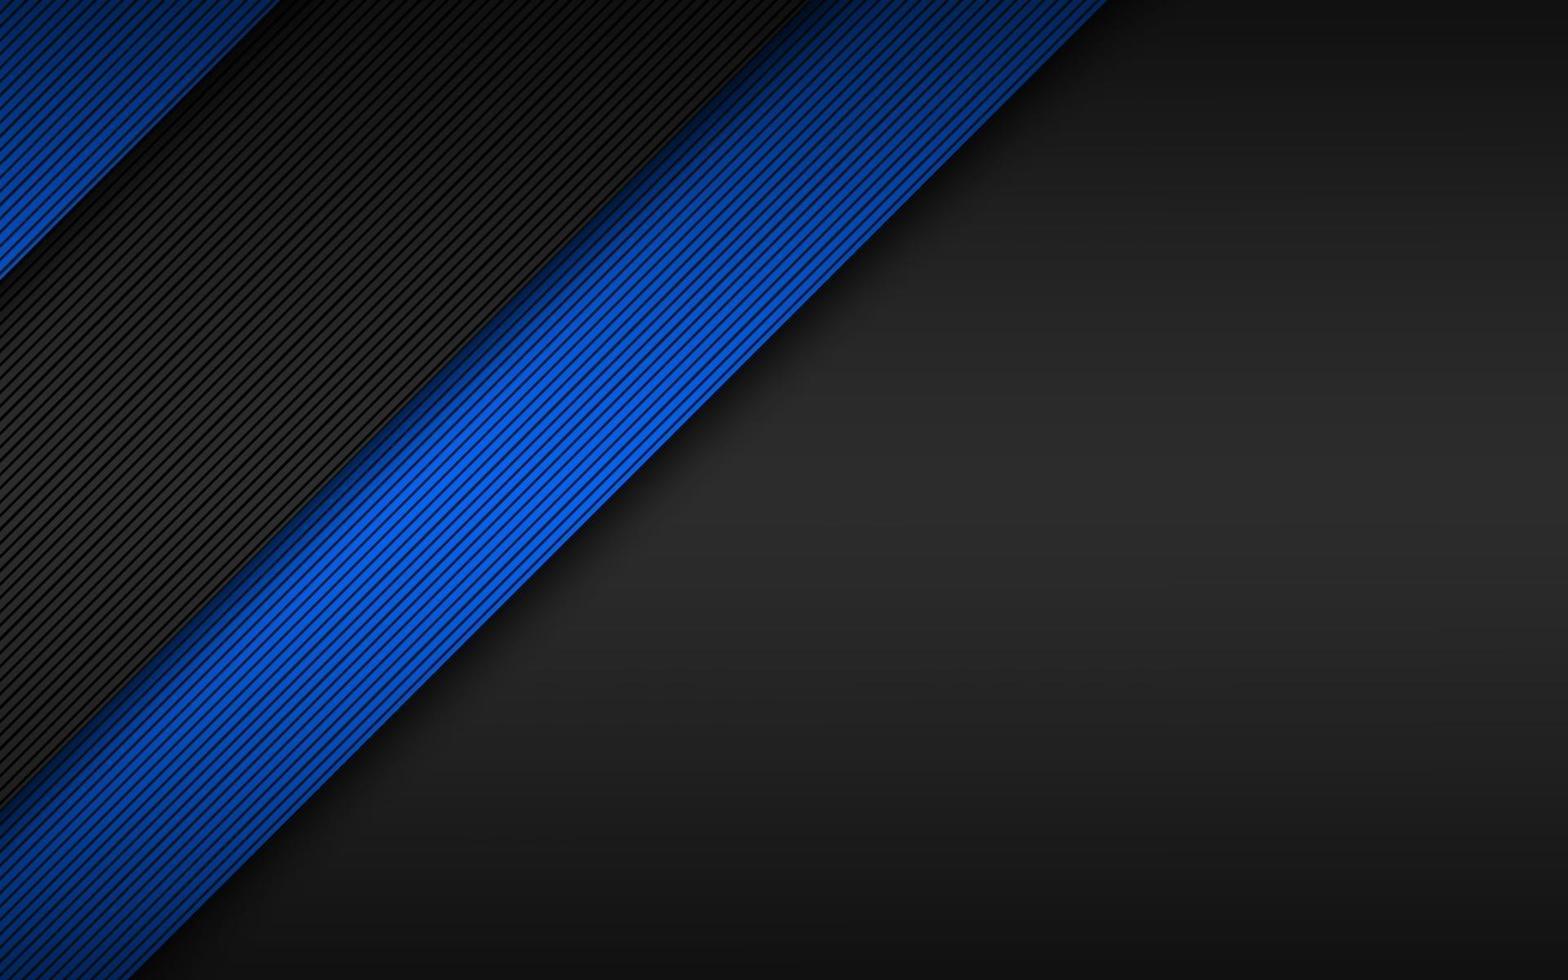 Black and blue modern material design. Corporate template with overlapped layers for your business. Vector abstract widescreen background